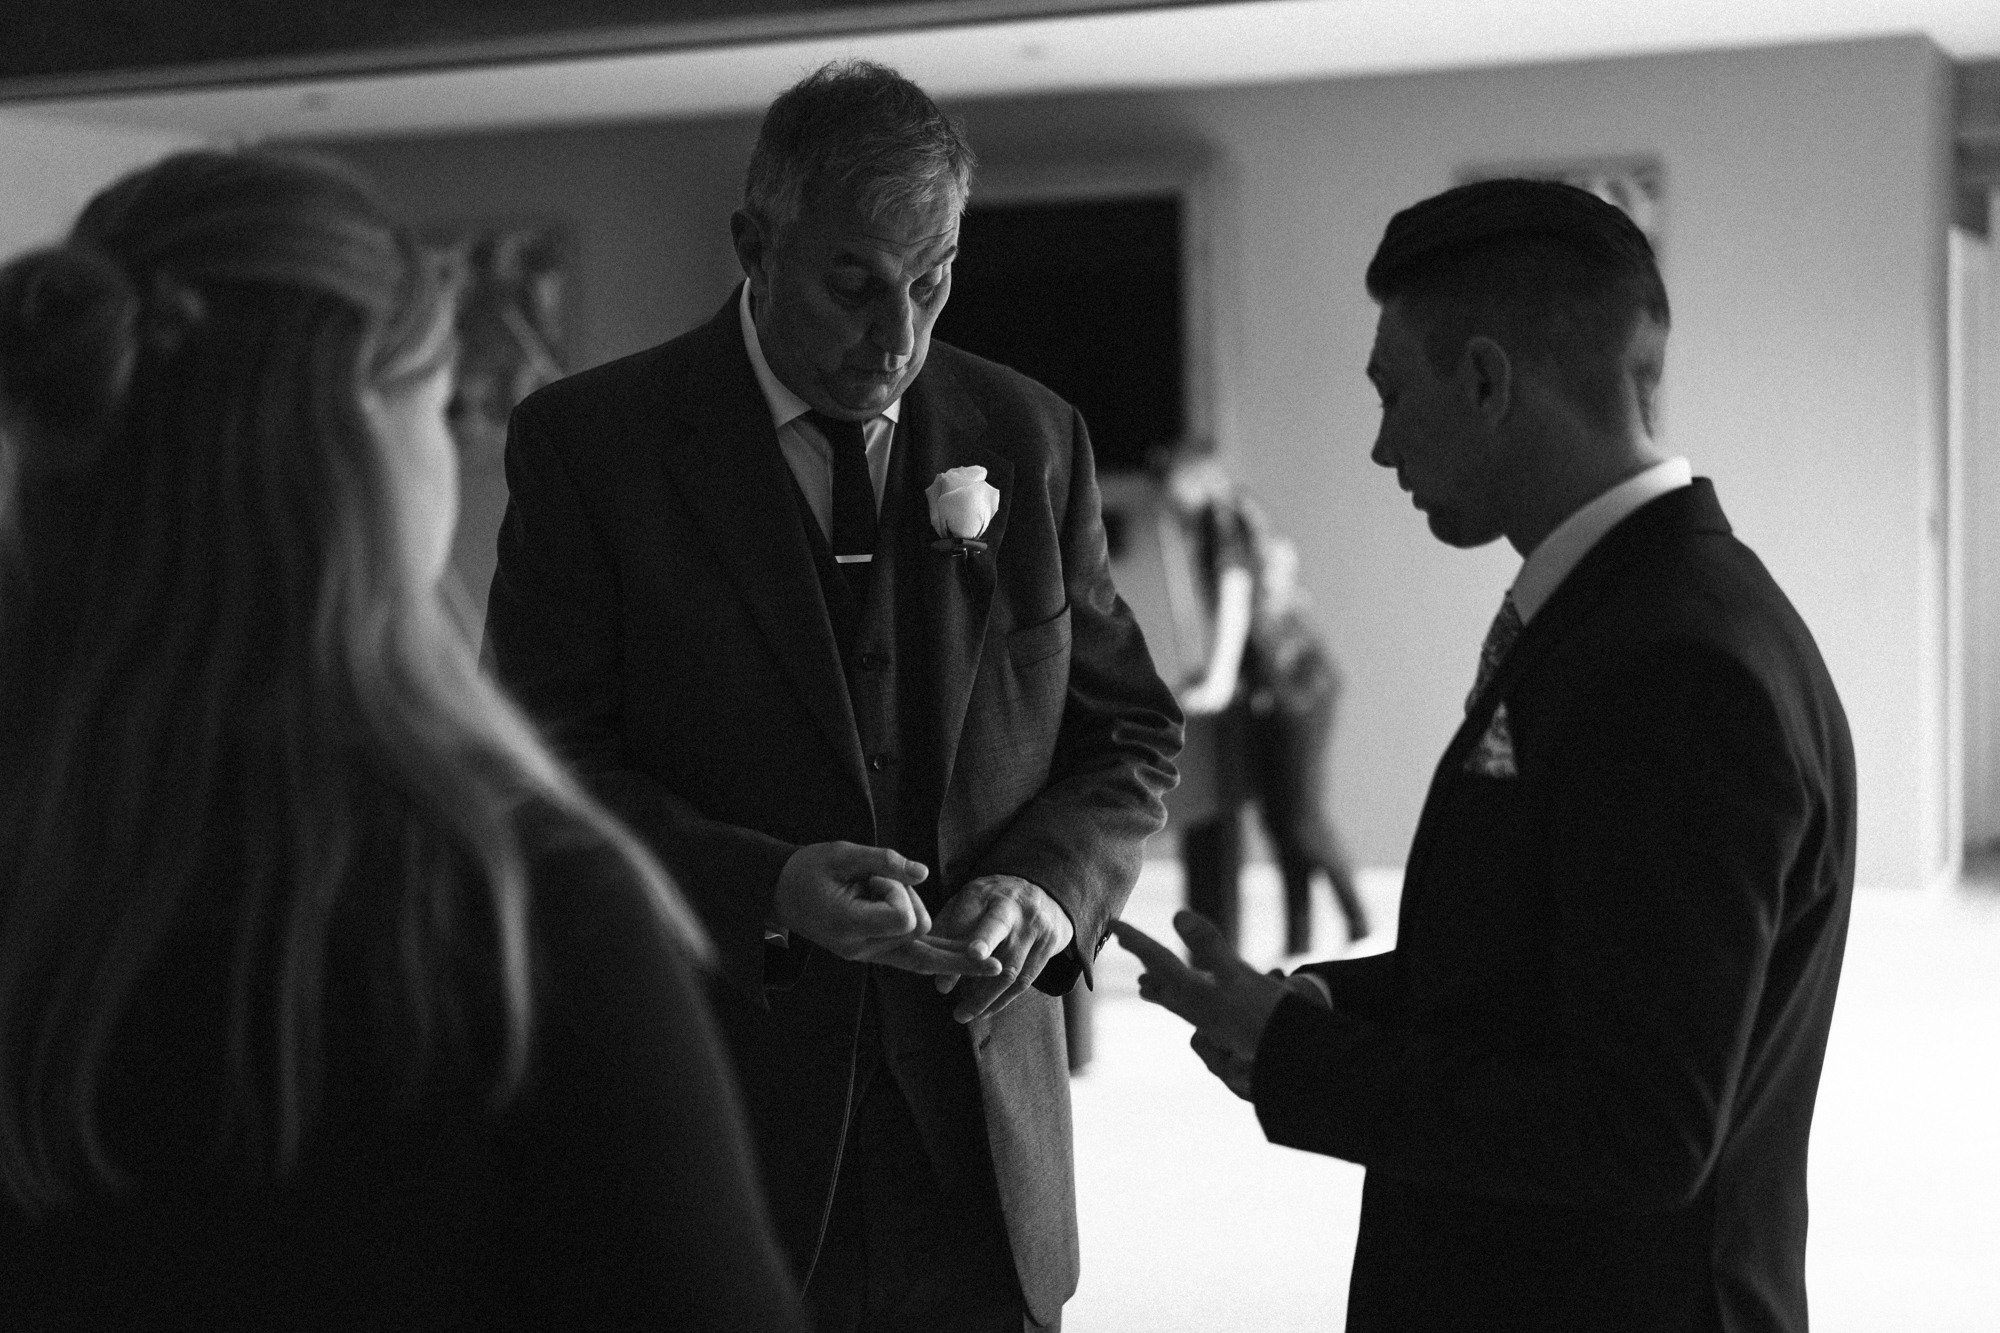 The groom and his father work out who needs button hole flowers